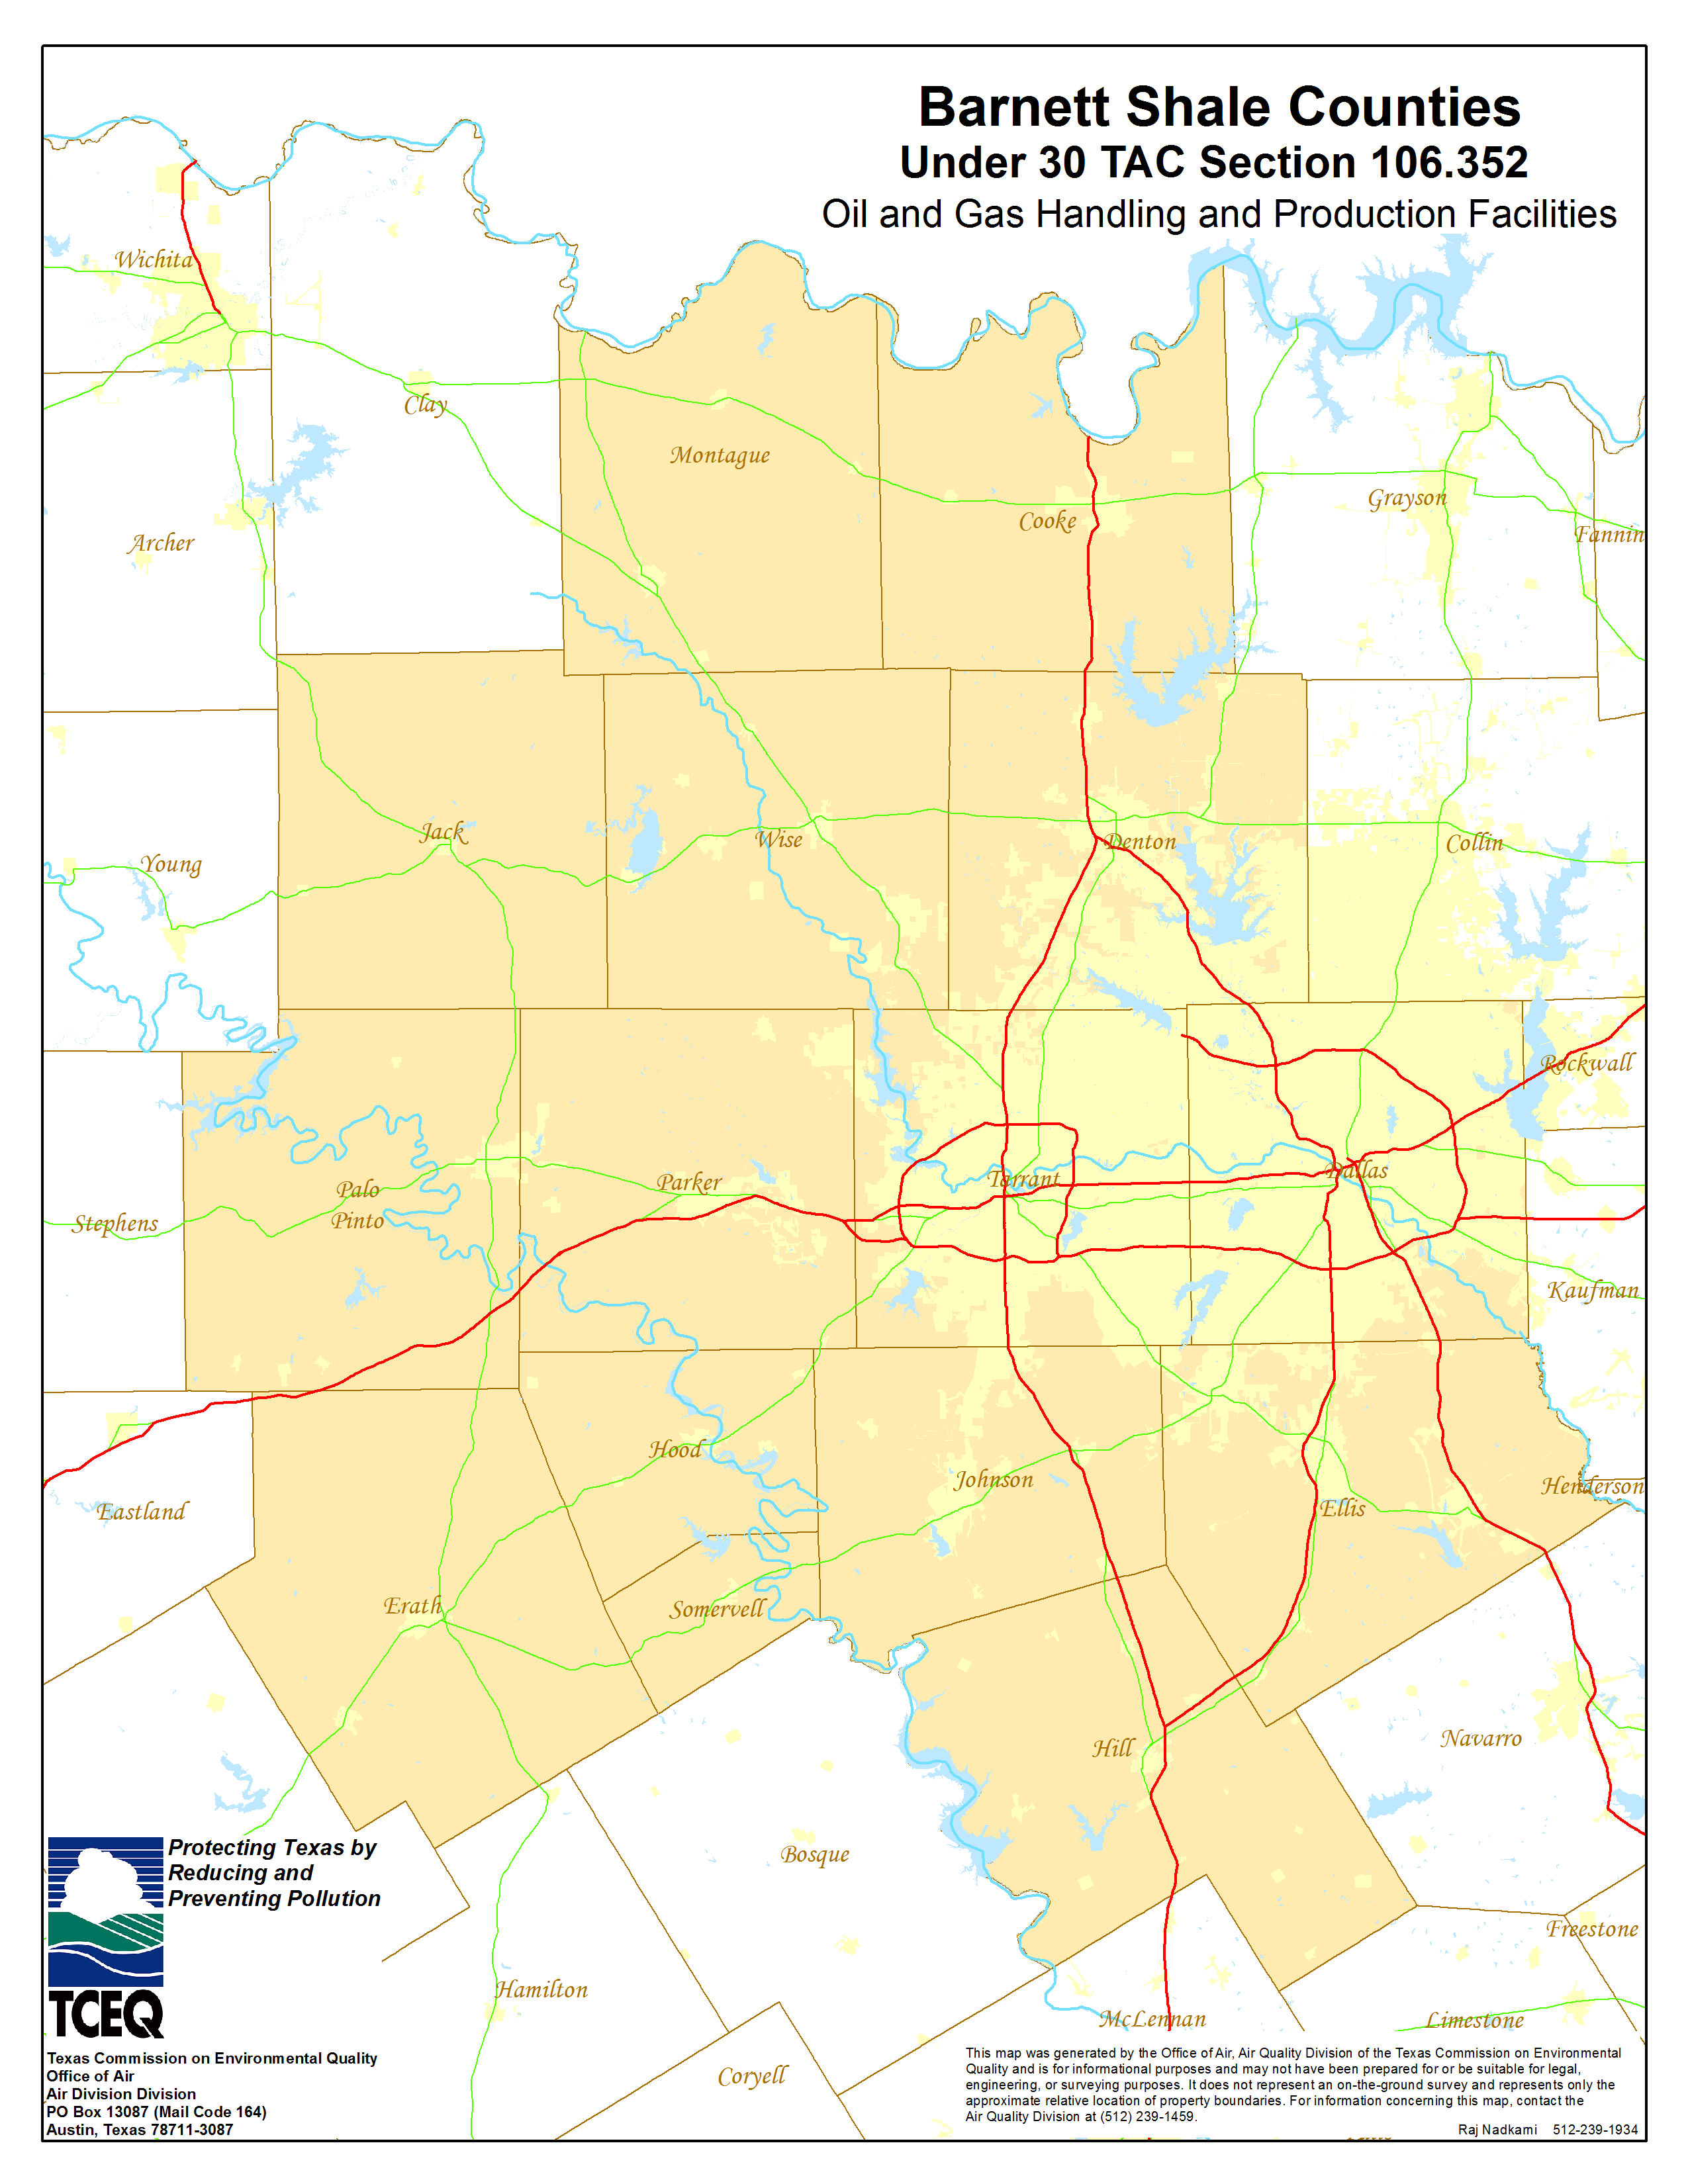 Barnett Shale Maps And Charts - Tceq - Www.tceq.texas.gov - Texas Oil And Gas Lease Maps